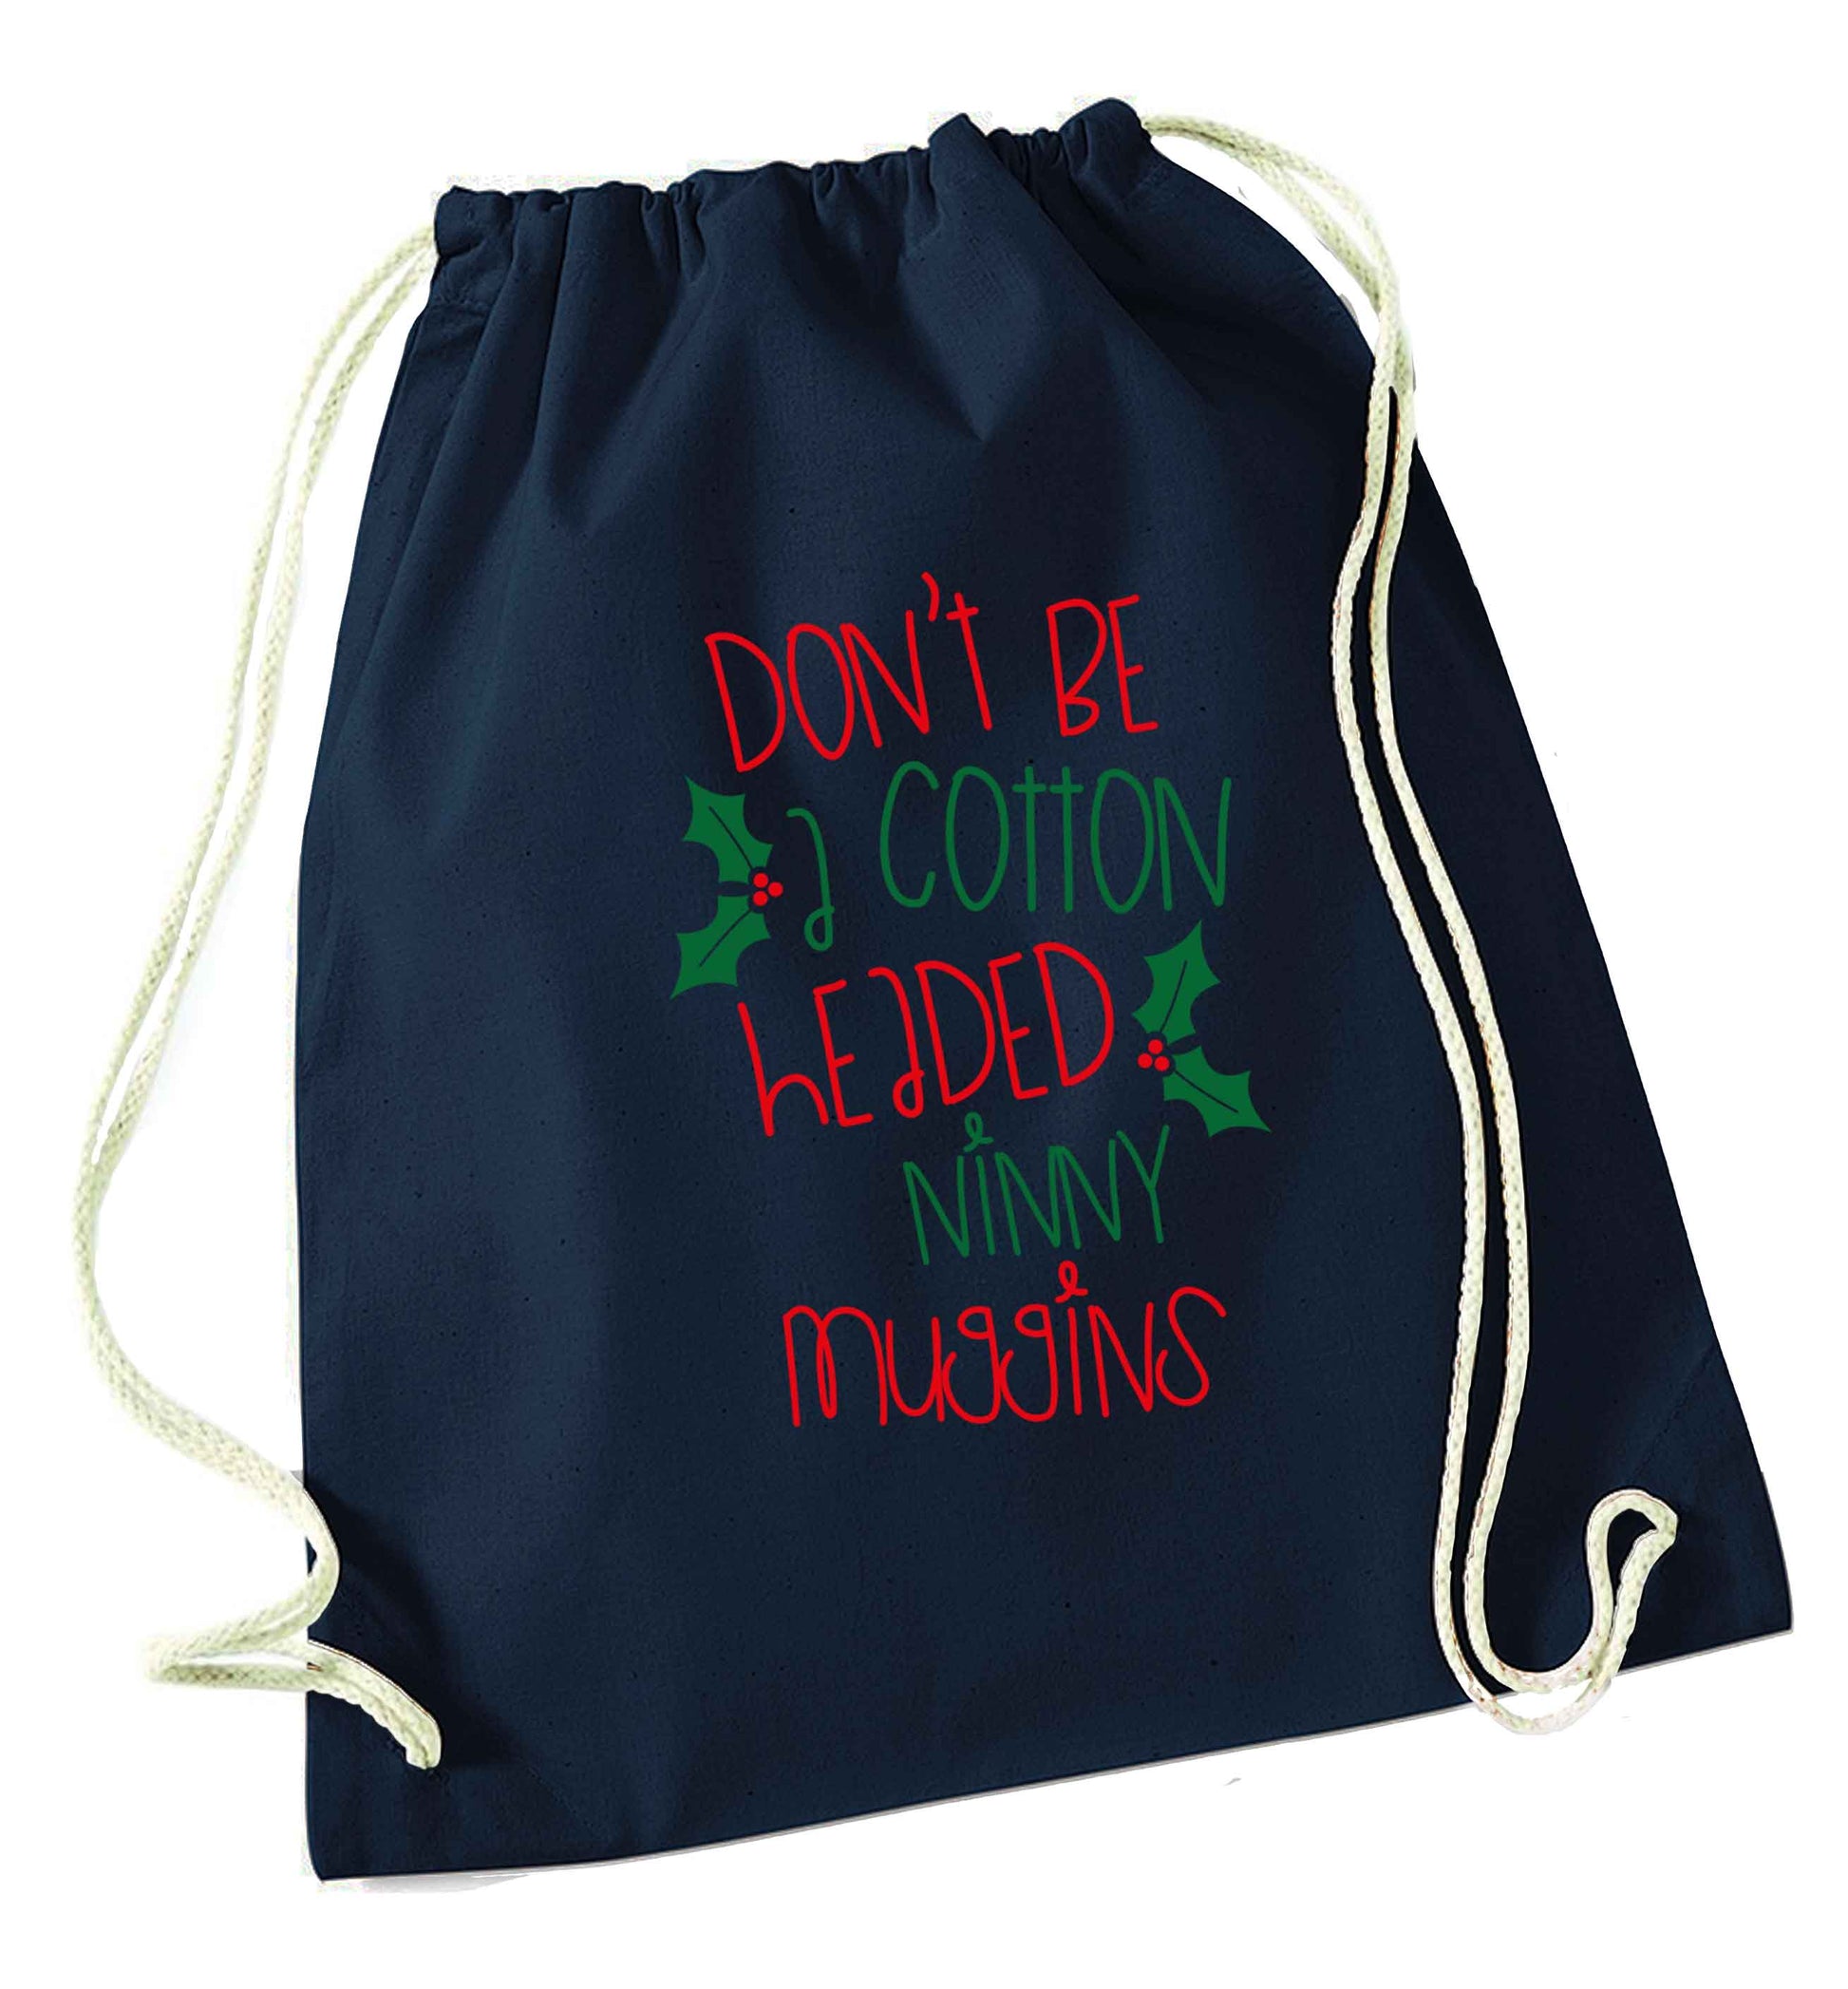 Too Late to be Good navy drawstring bag